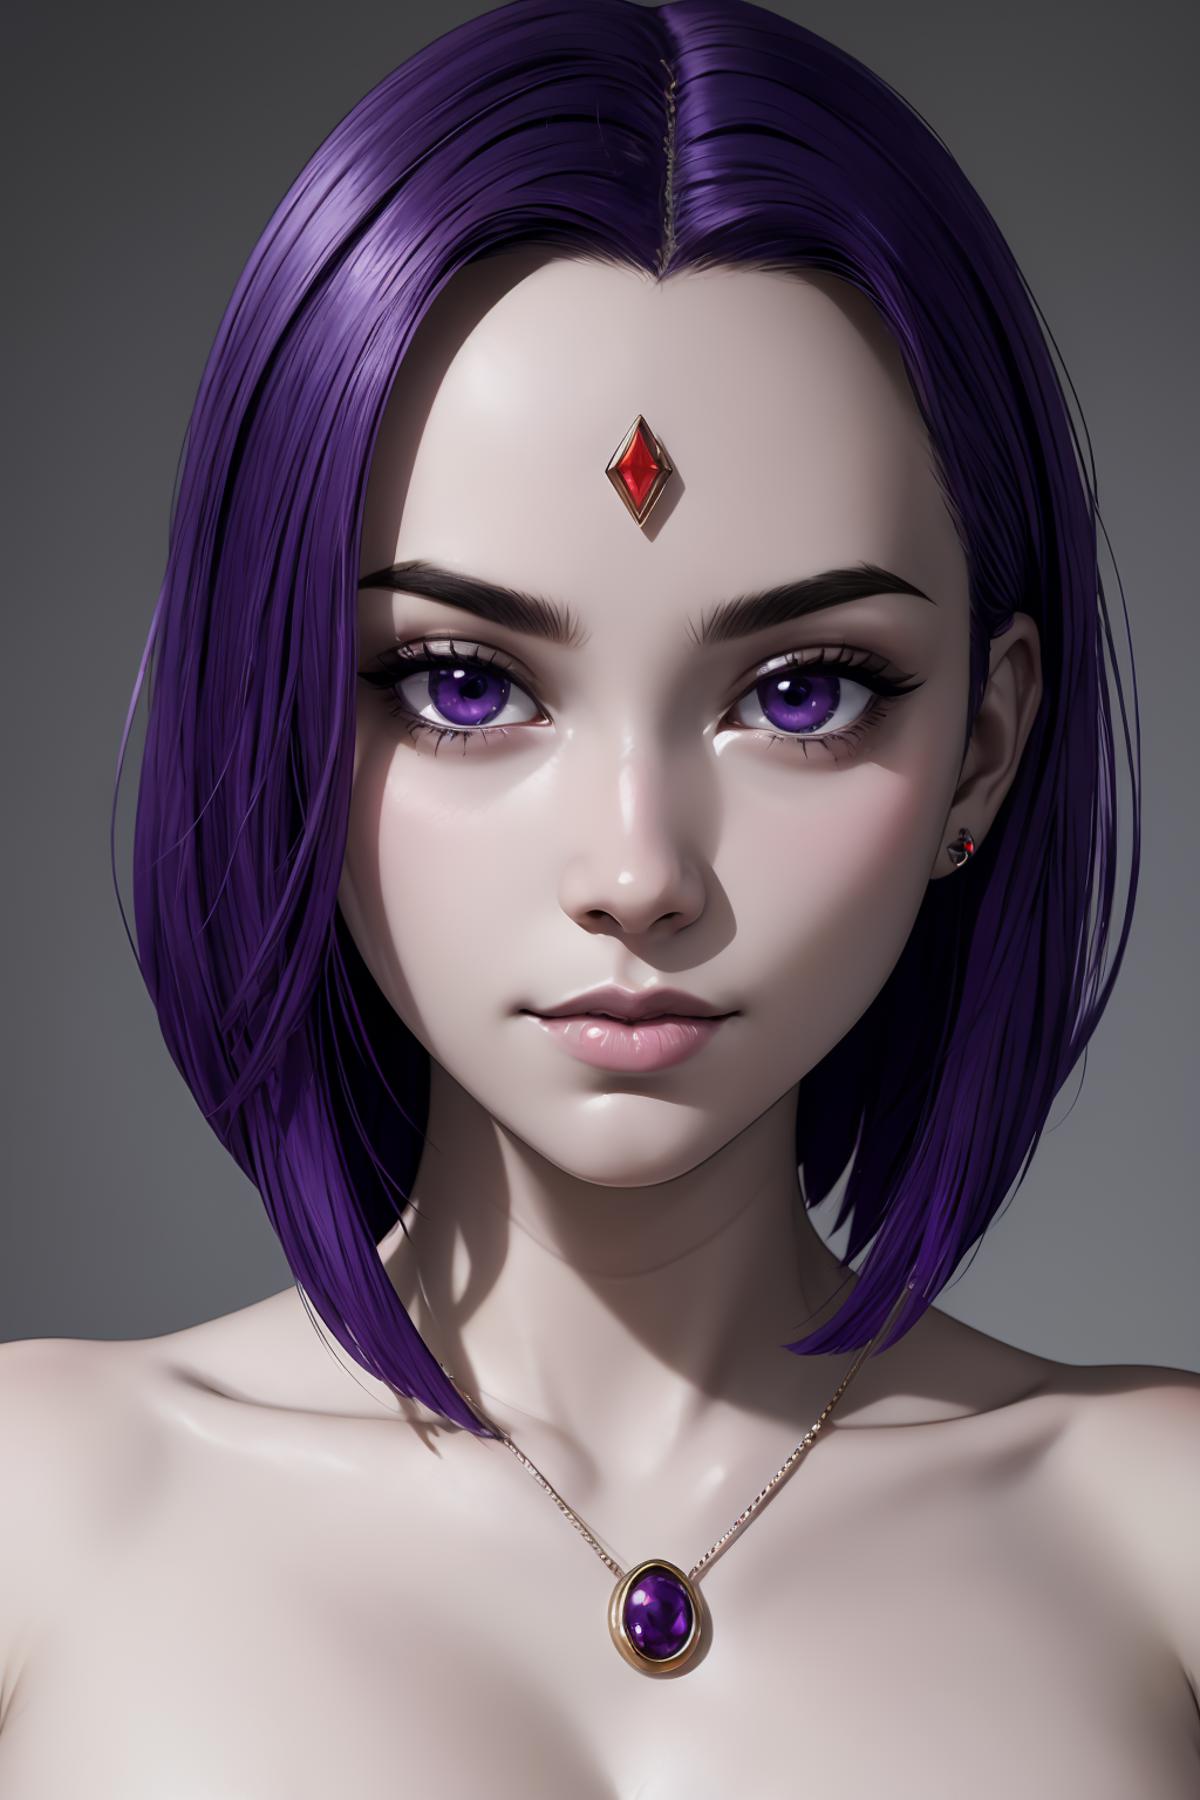 Raven - Teen Titans image by interfusor